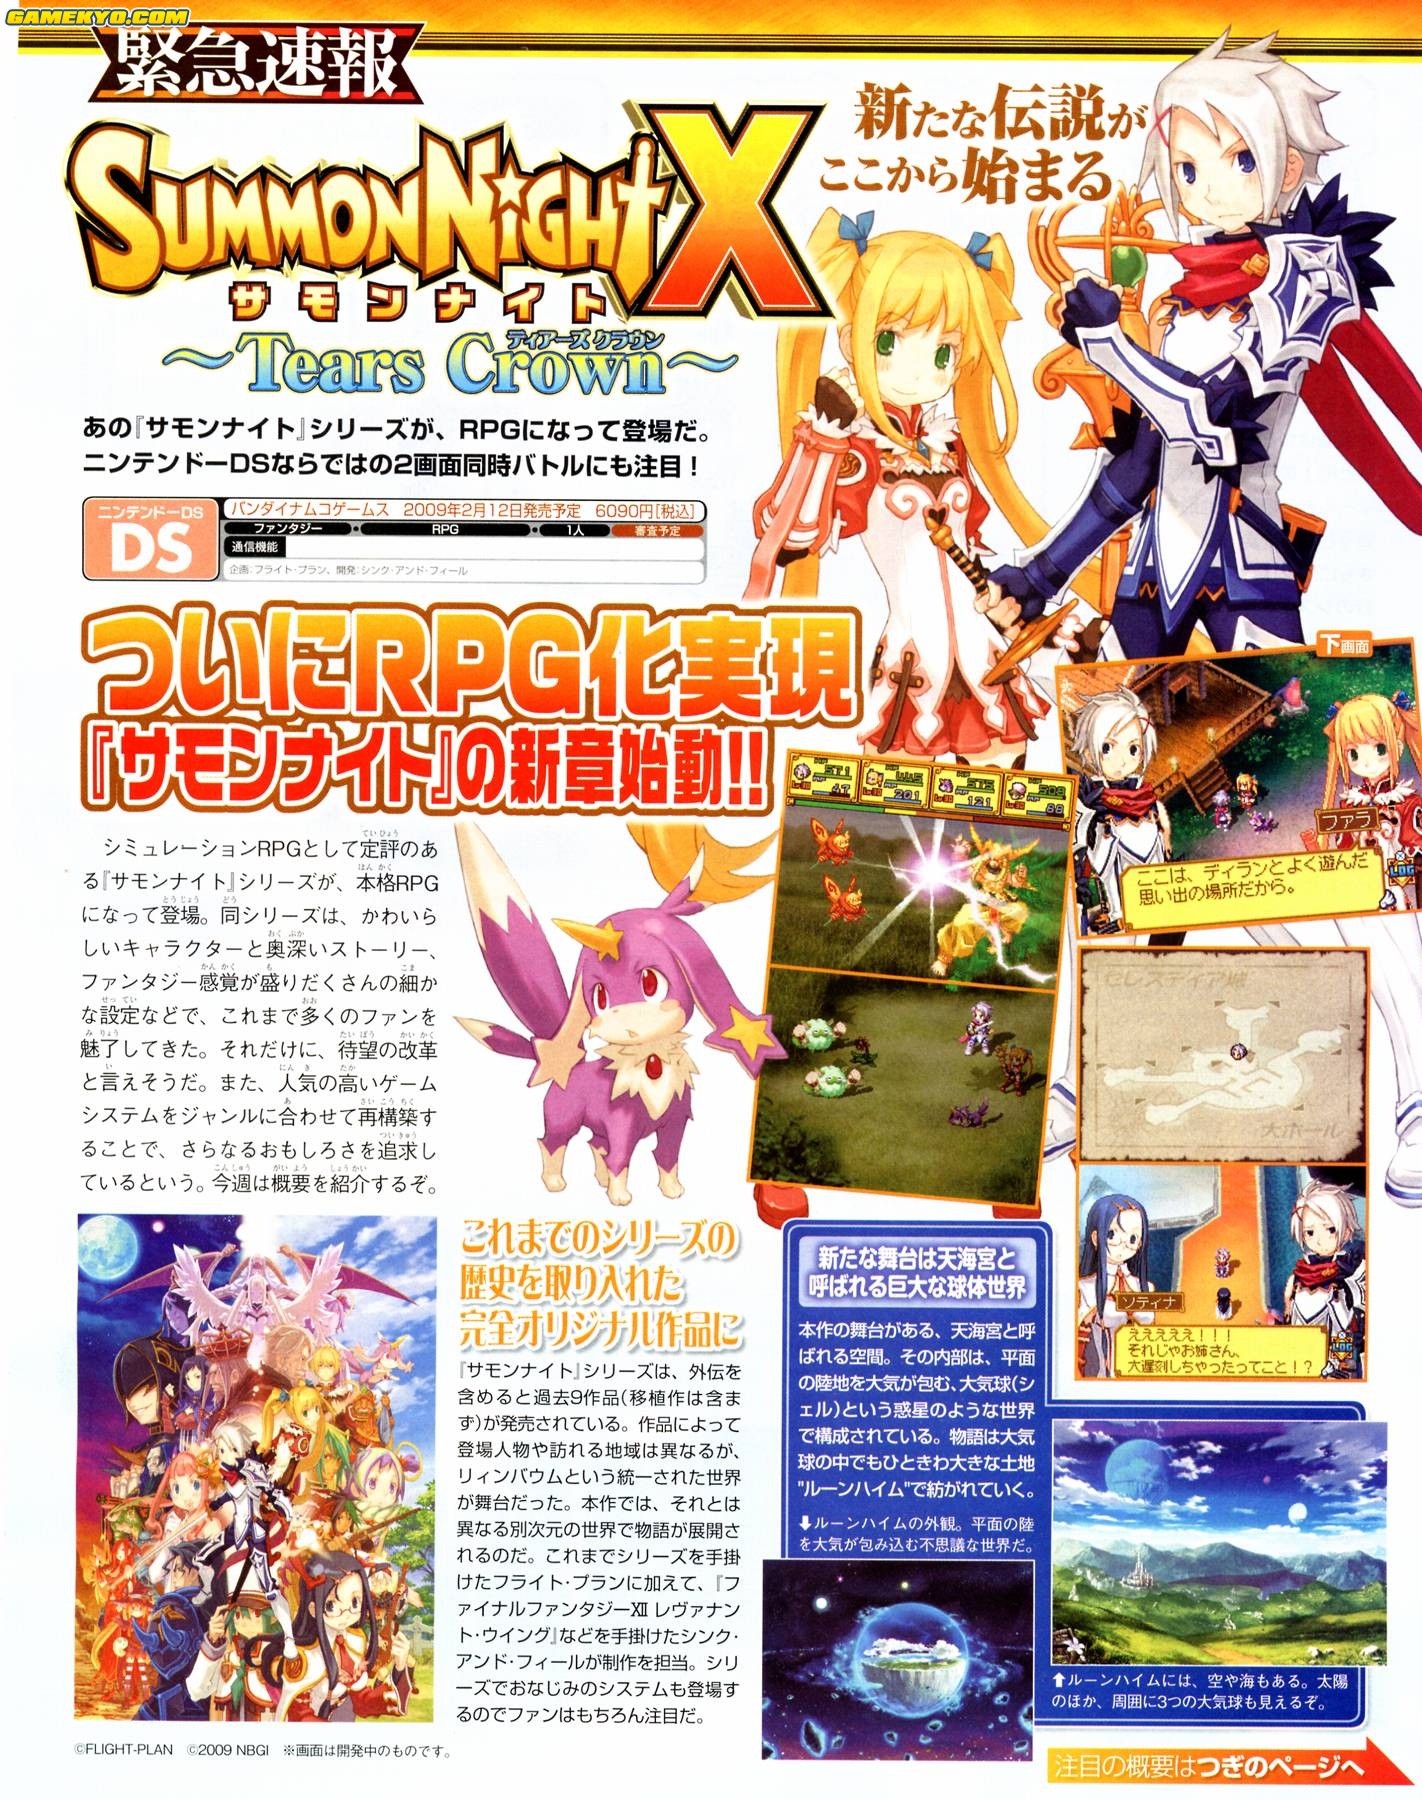 Summon Night X : Tears Crown announced for the Nintendo DS